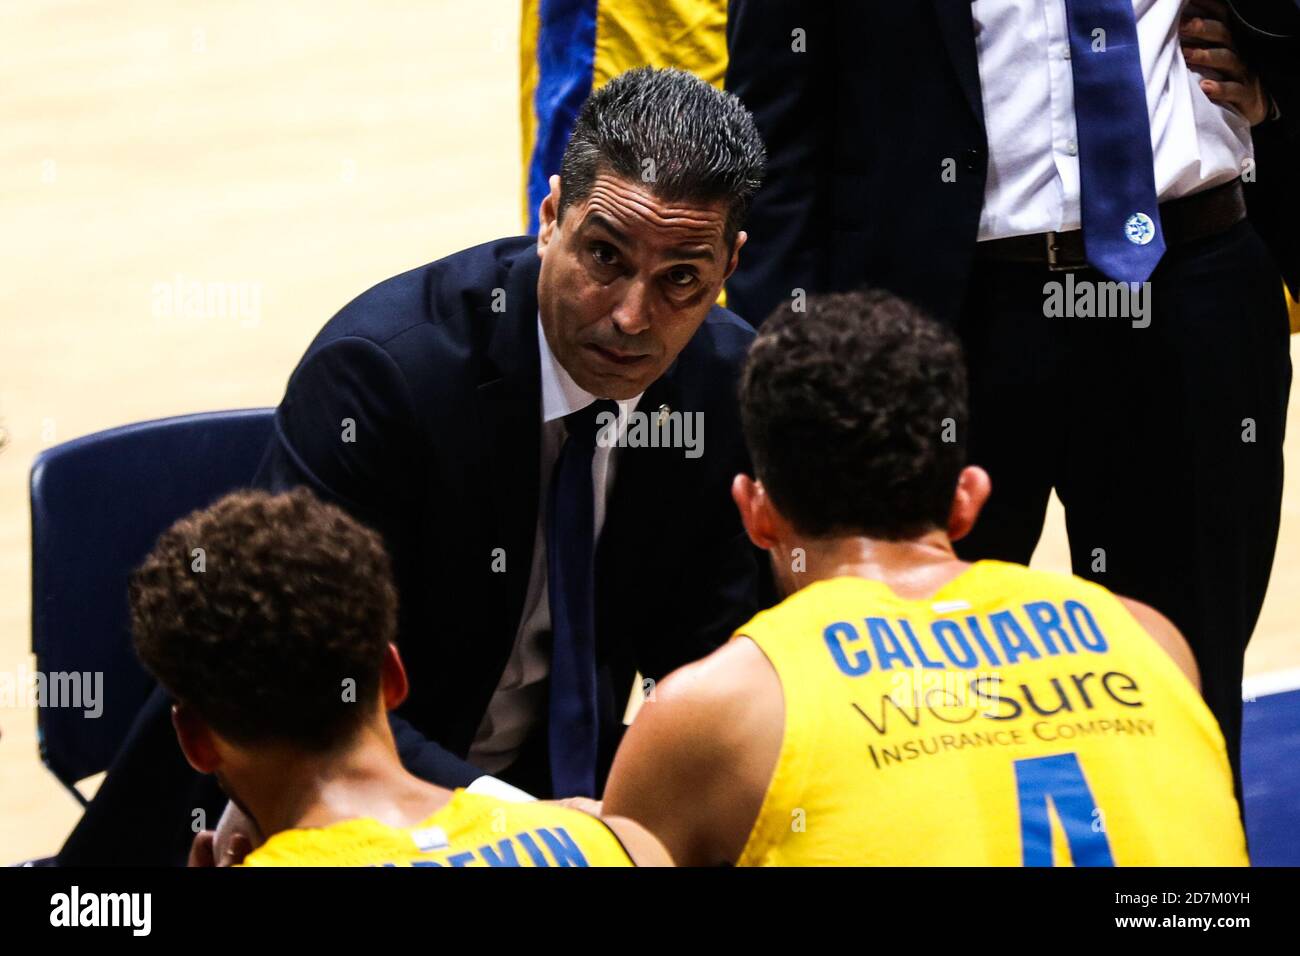 Moscow Region, Russia. 23rd Oct, 2020. Maccabi head coach Ioannis  Sfairopoulos briefs players in the 2020/21 Euroleague Regular Season Round  5 basketball match between Khimki Moscow Region and Maccabi Tel Aviv BC